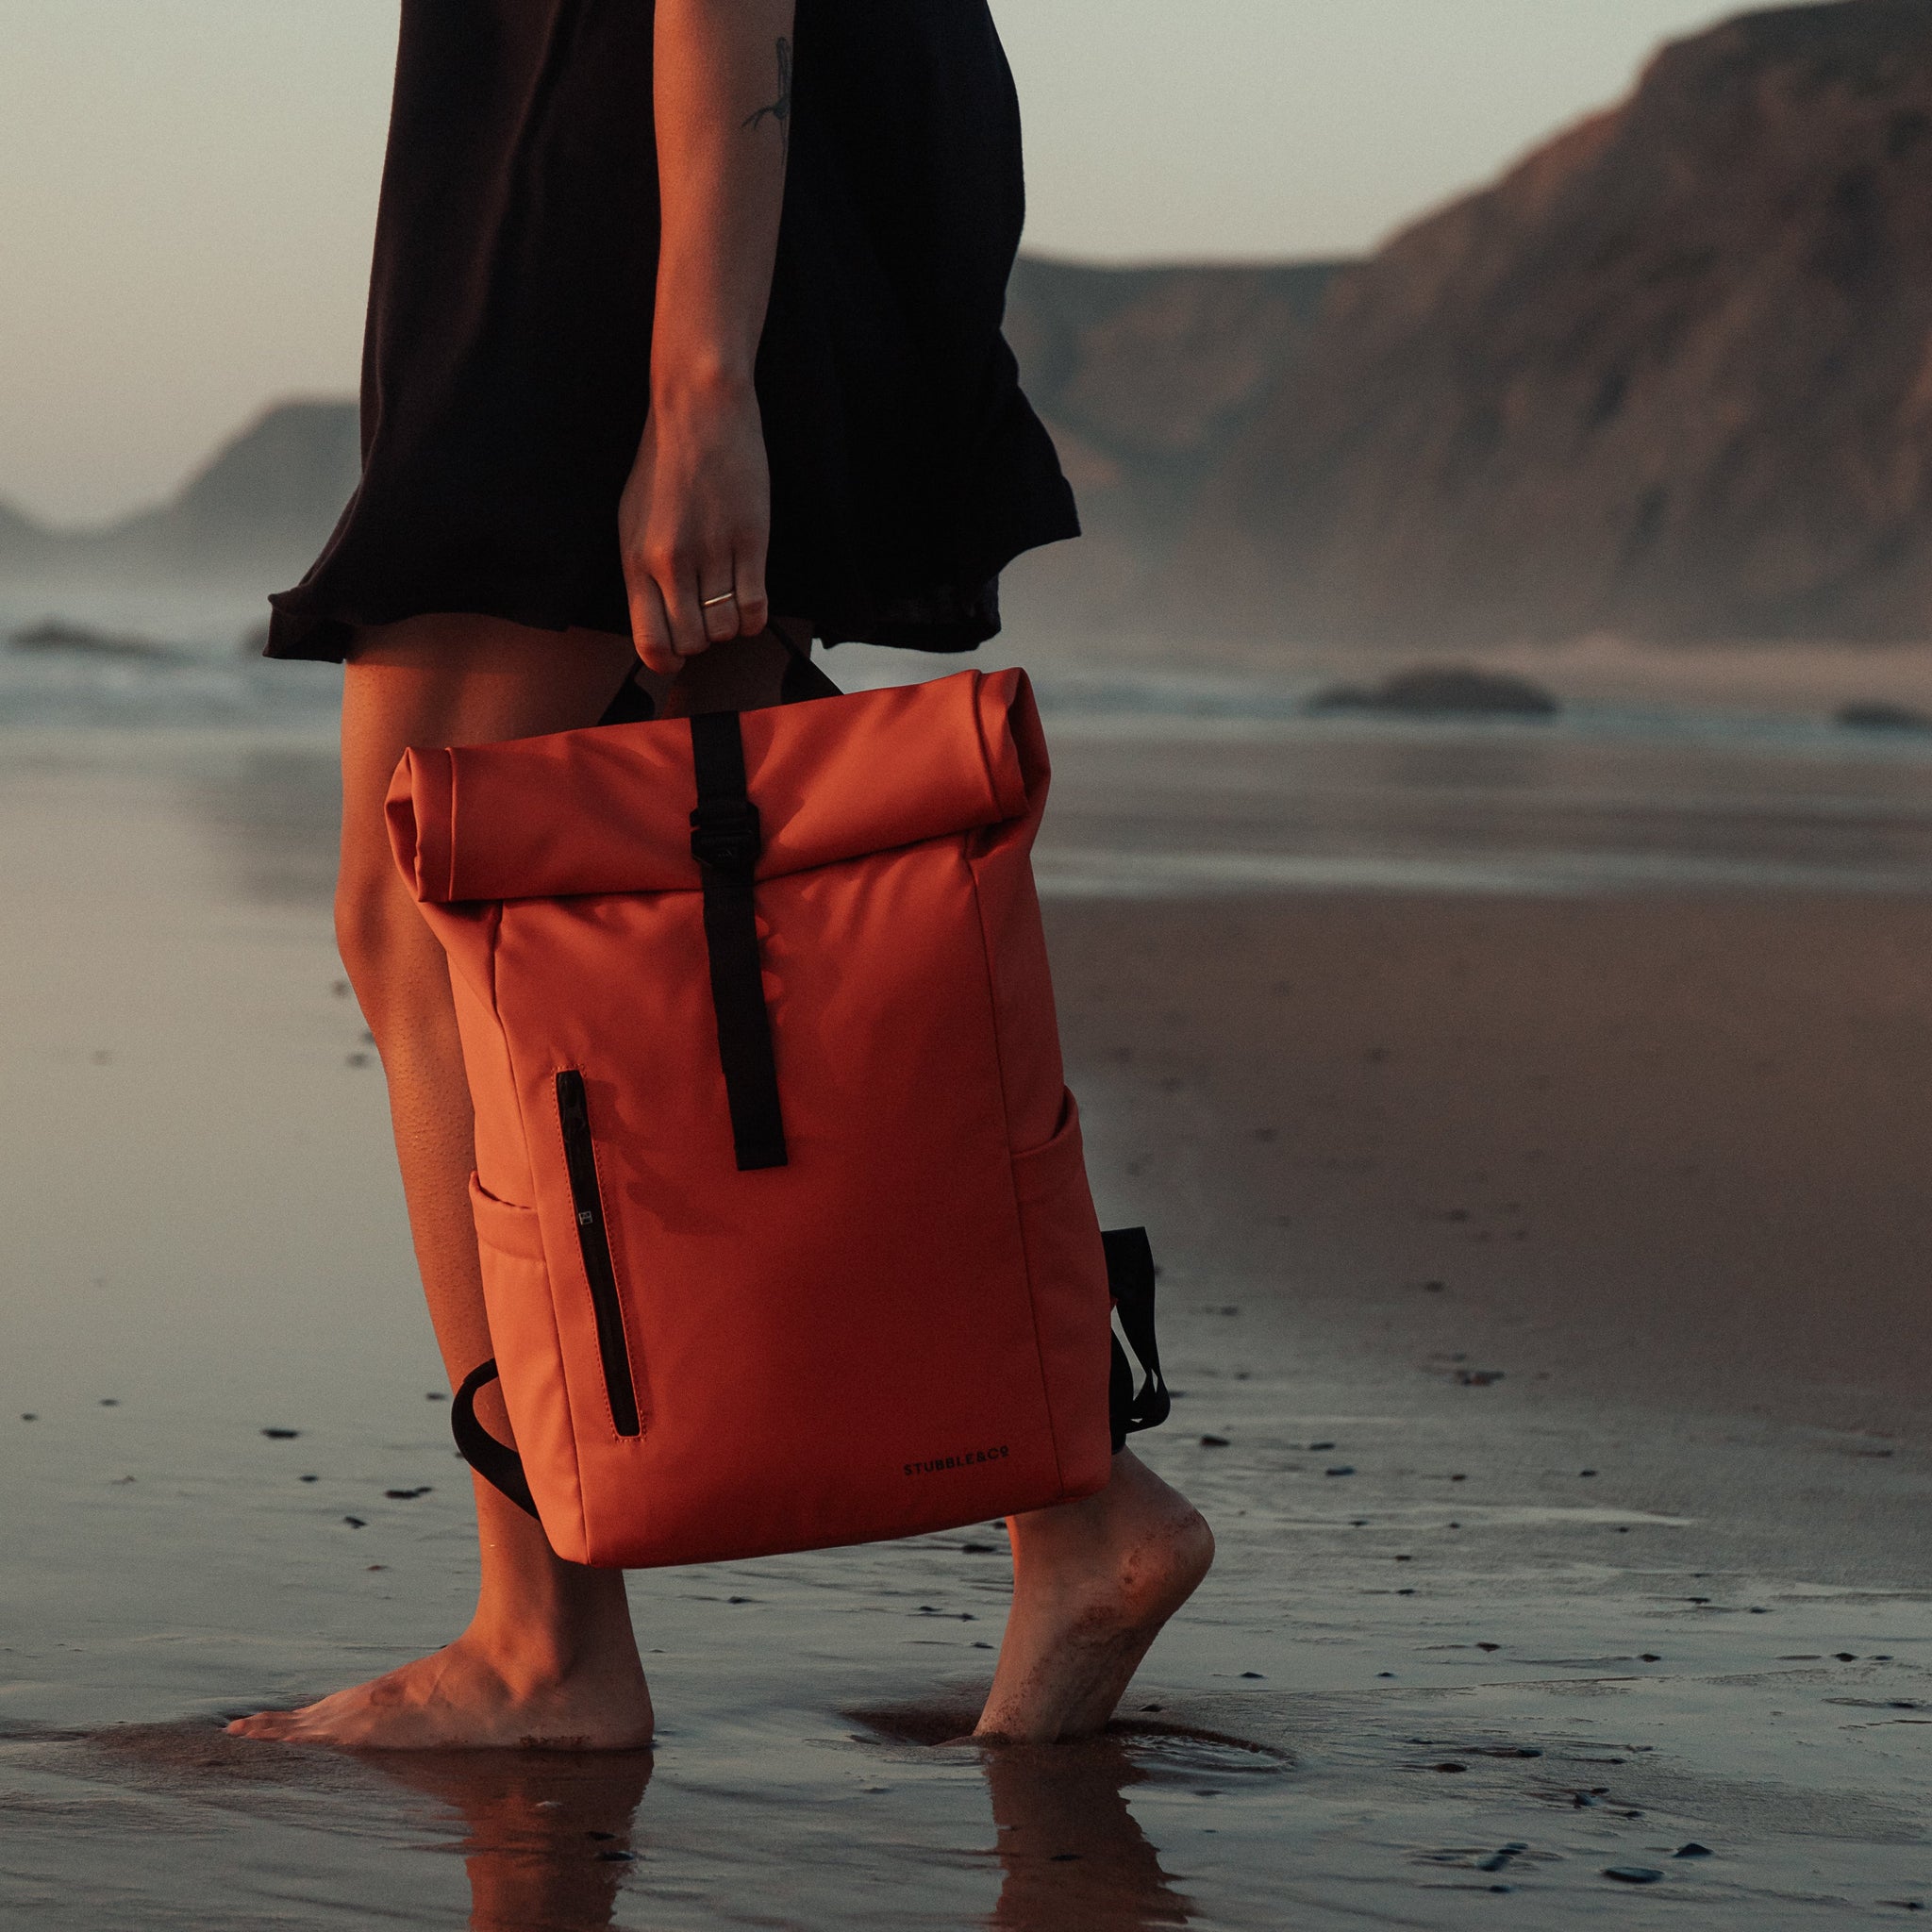 Women carries The Roll Top 15L in Ember Orange on a beach